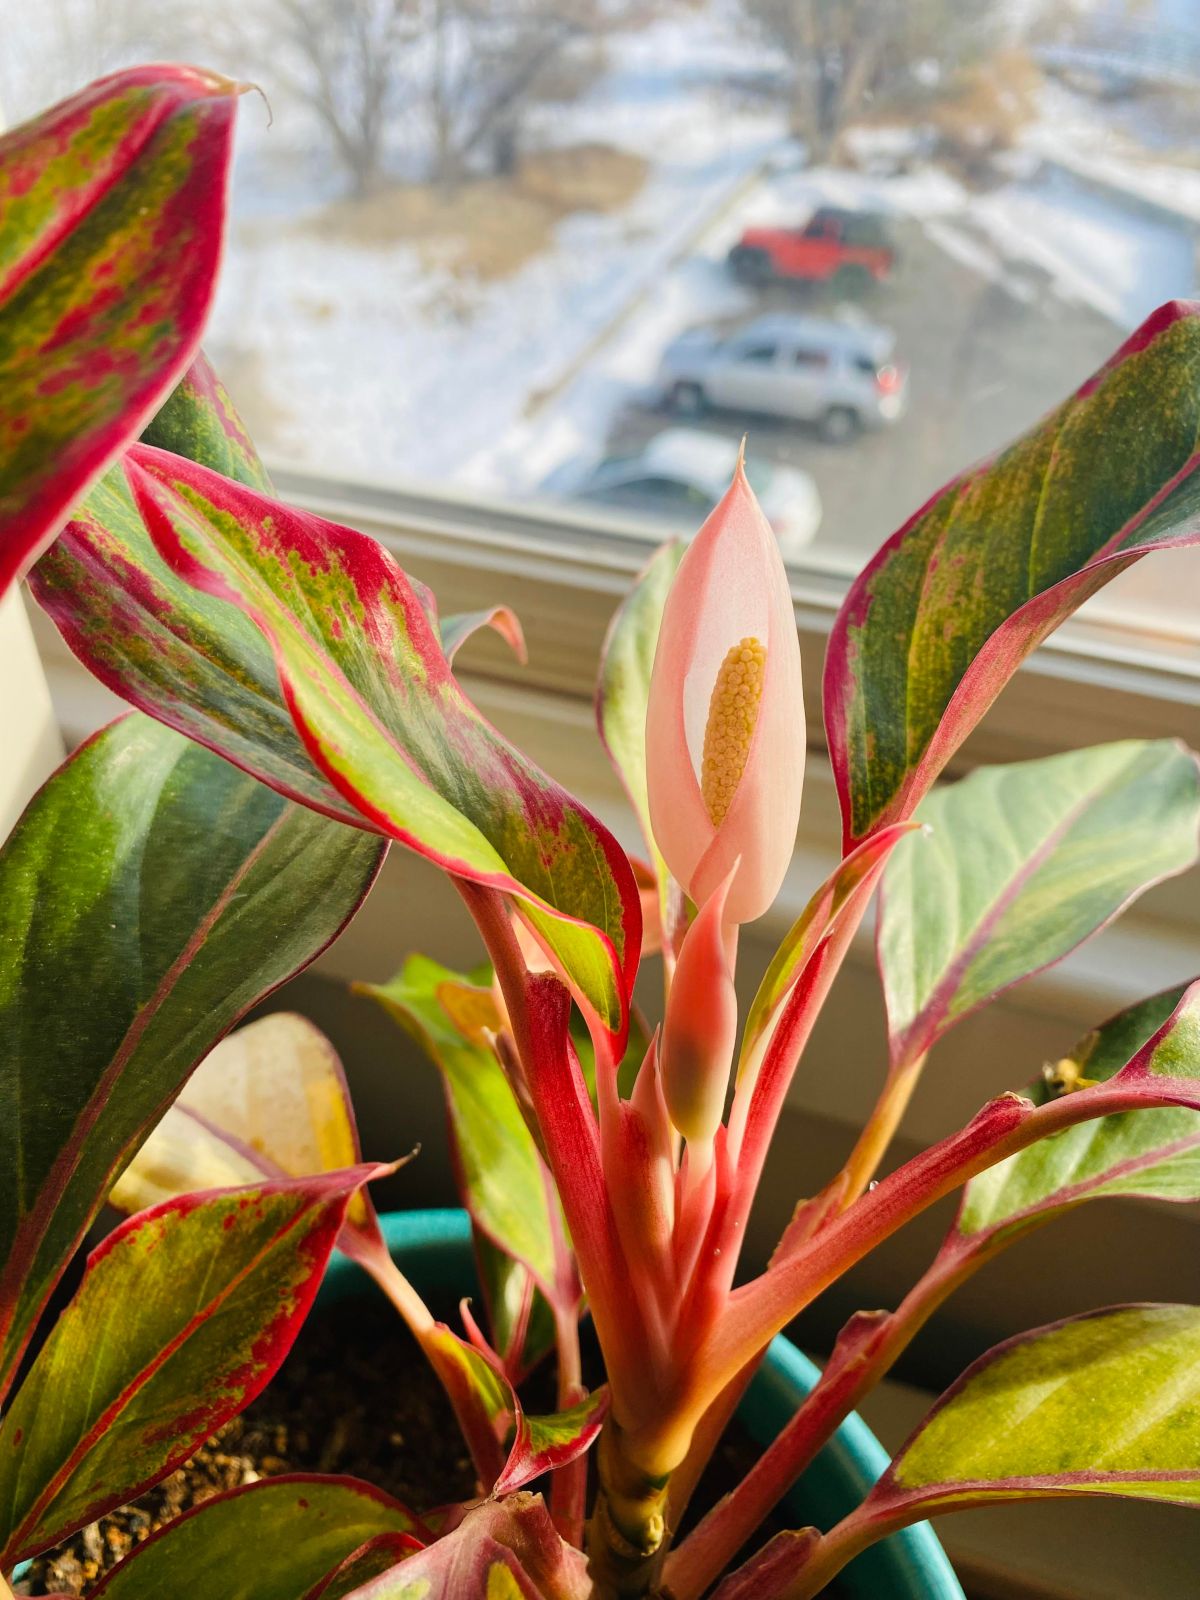 What Should You Do With The Chinese Evergreen Bloom